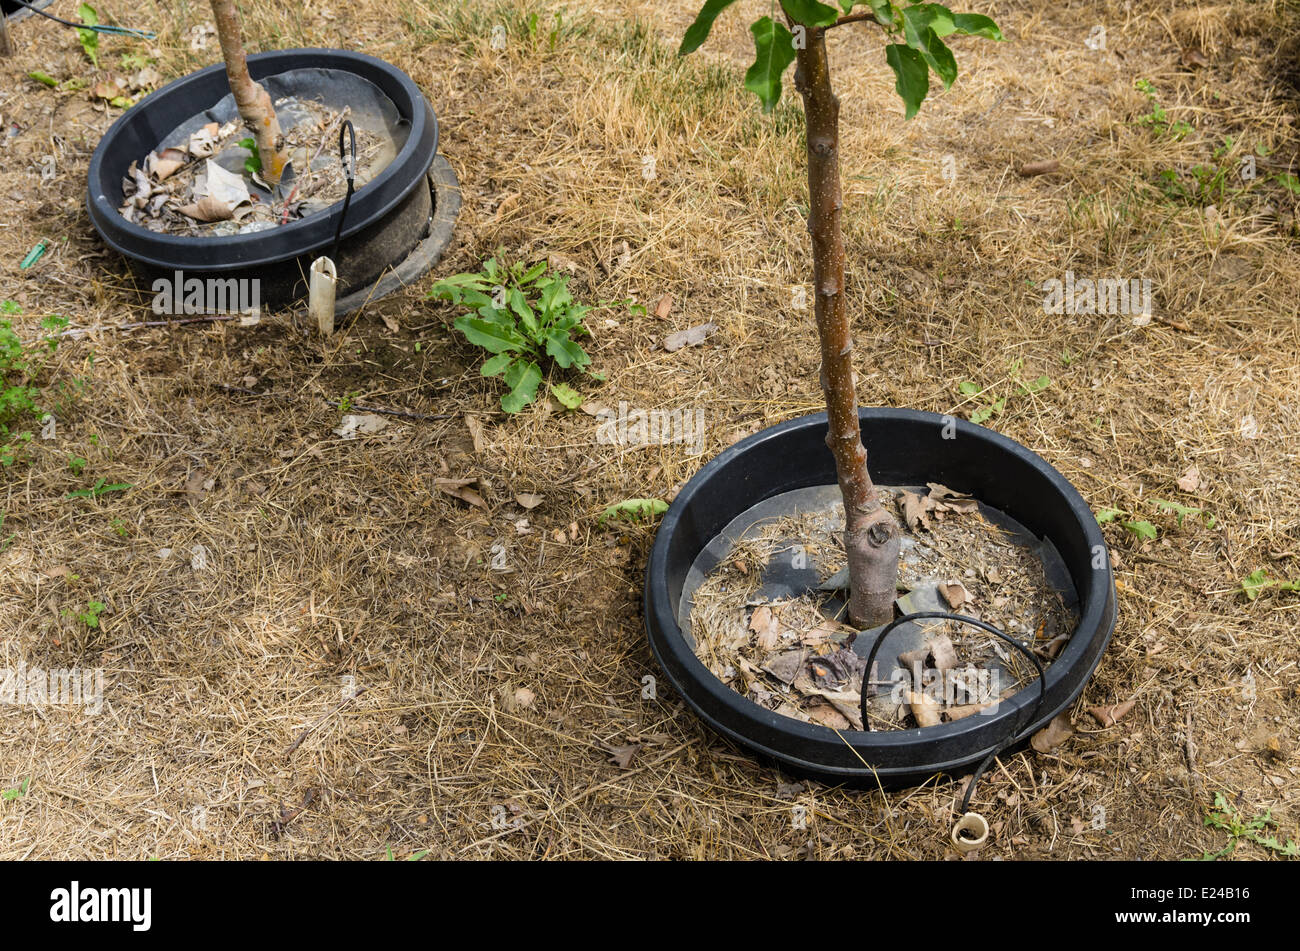 Trees growing in a nursery pot in pot system Stock Photo